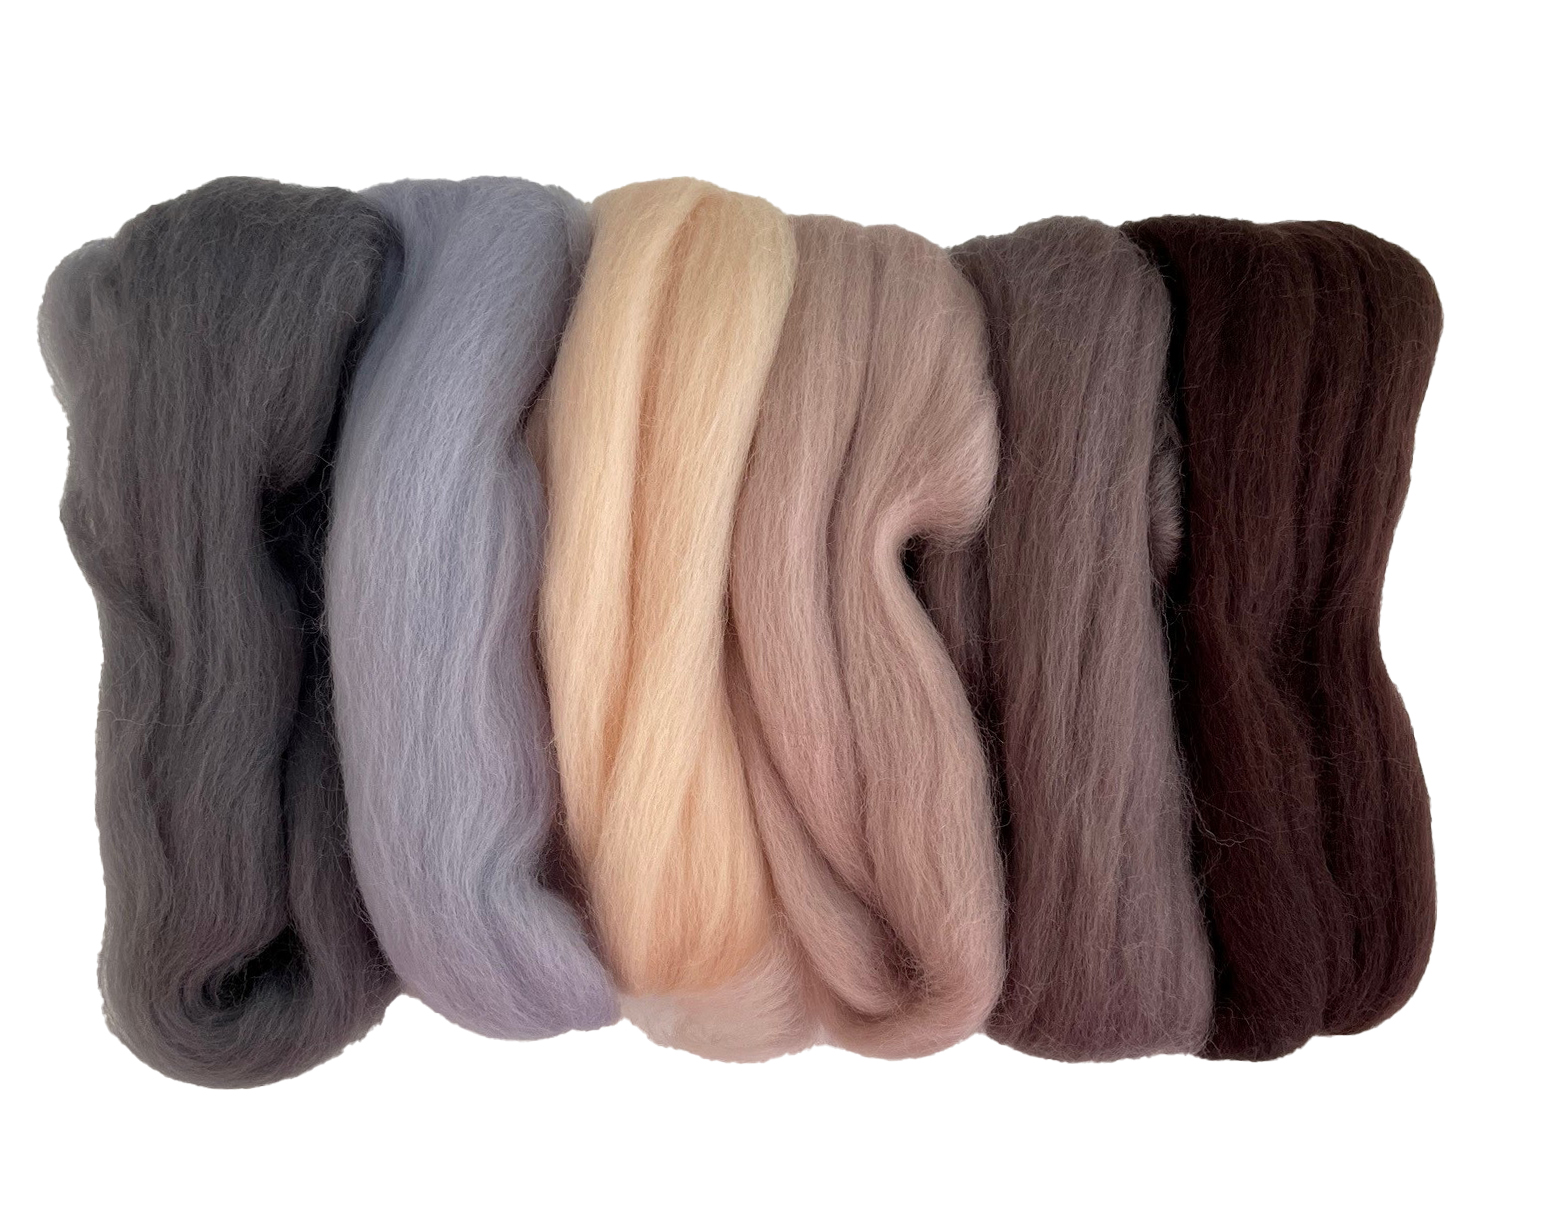 Corriedale Felting Wool- The Wildlife Collection (12 colors)